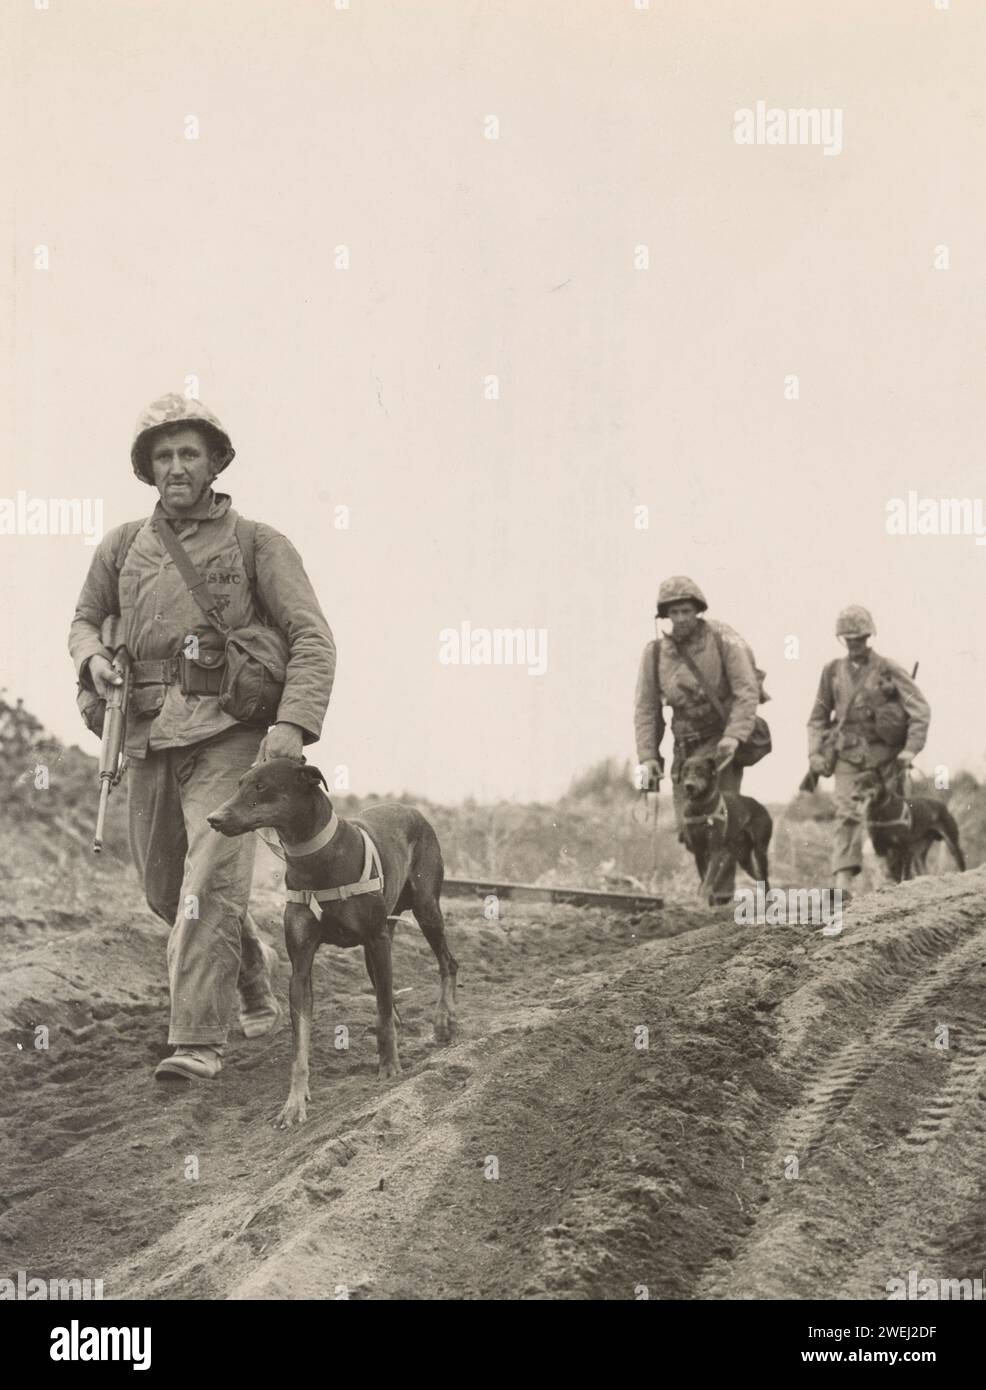 Members of a K-9 Unit move forward during the Battle of Iwo Jima 1945 Stock Photo